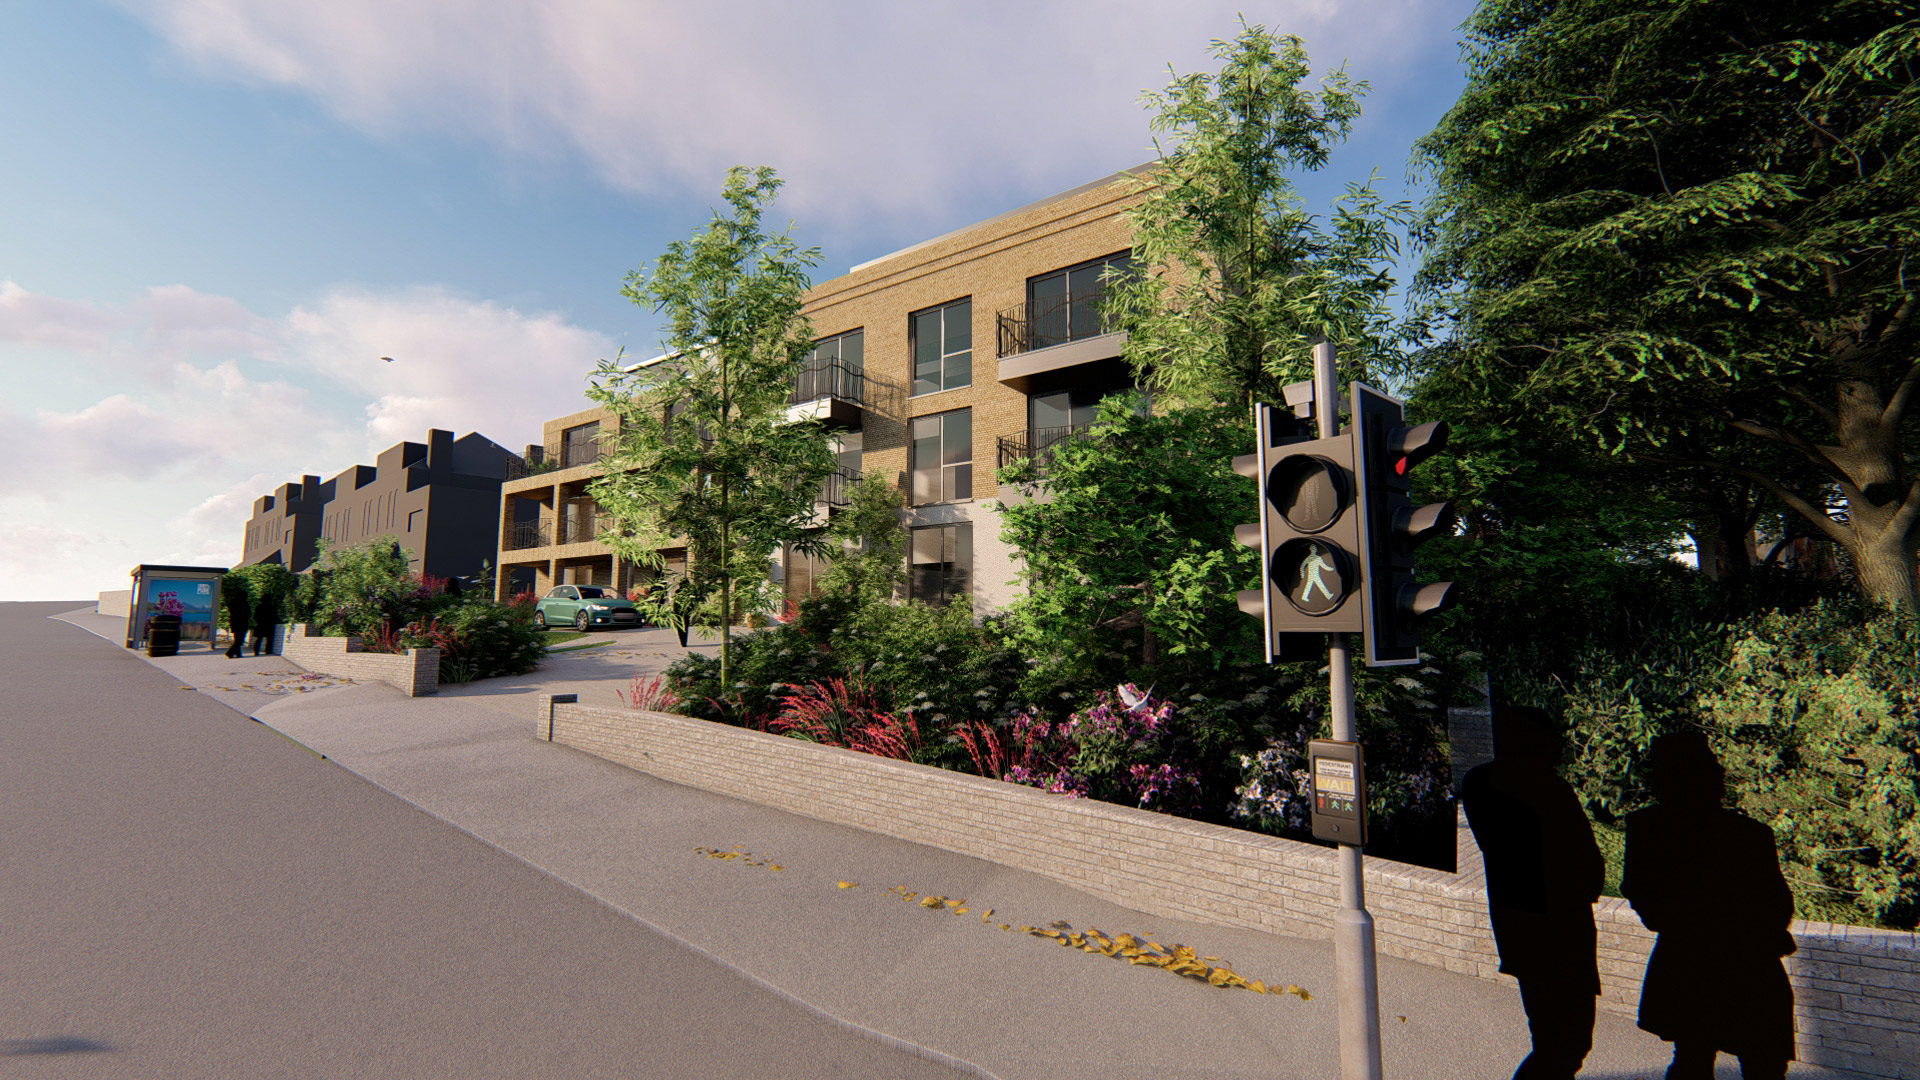 street view of proposed new flats behind foliage